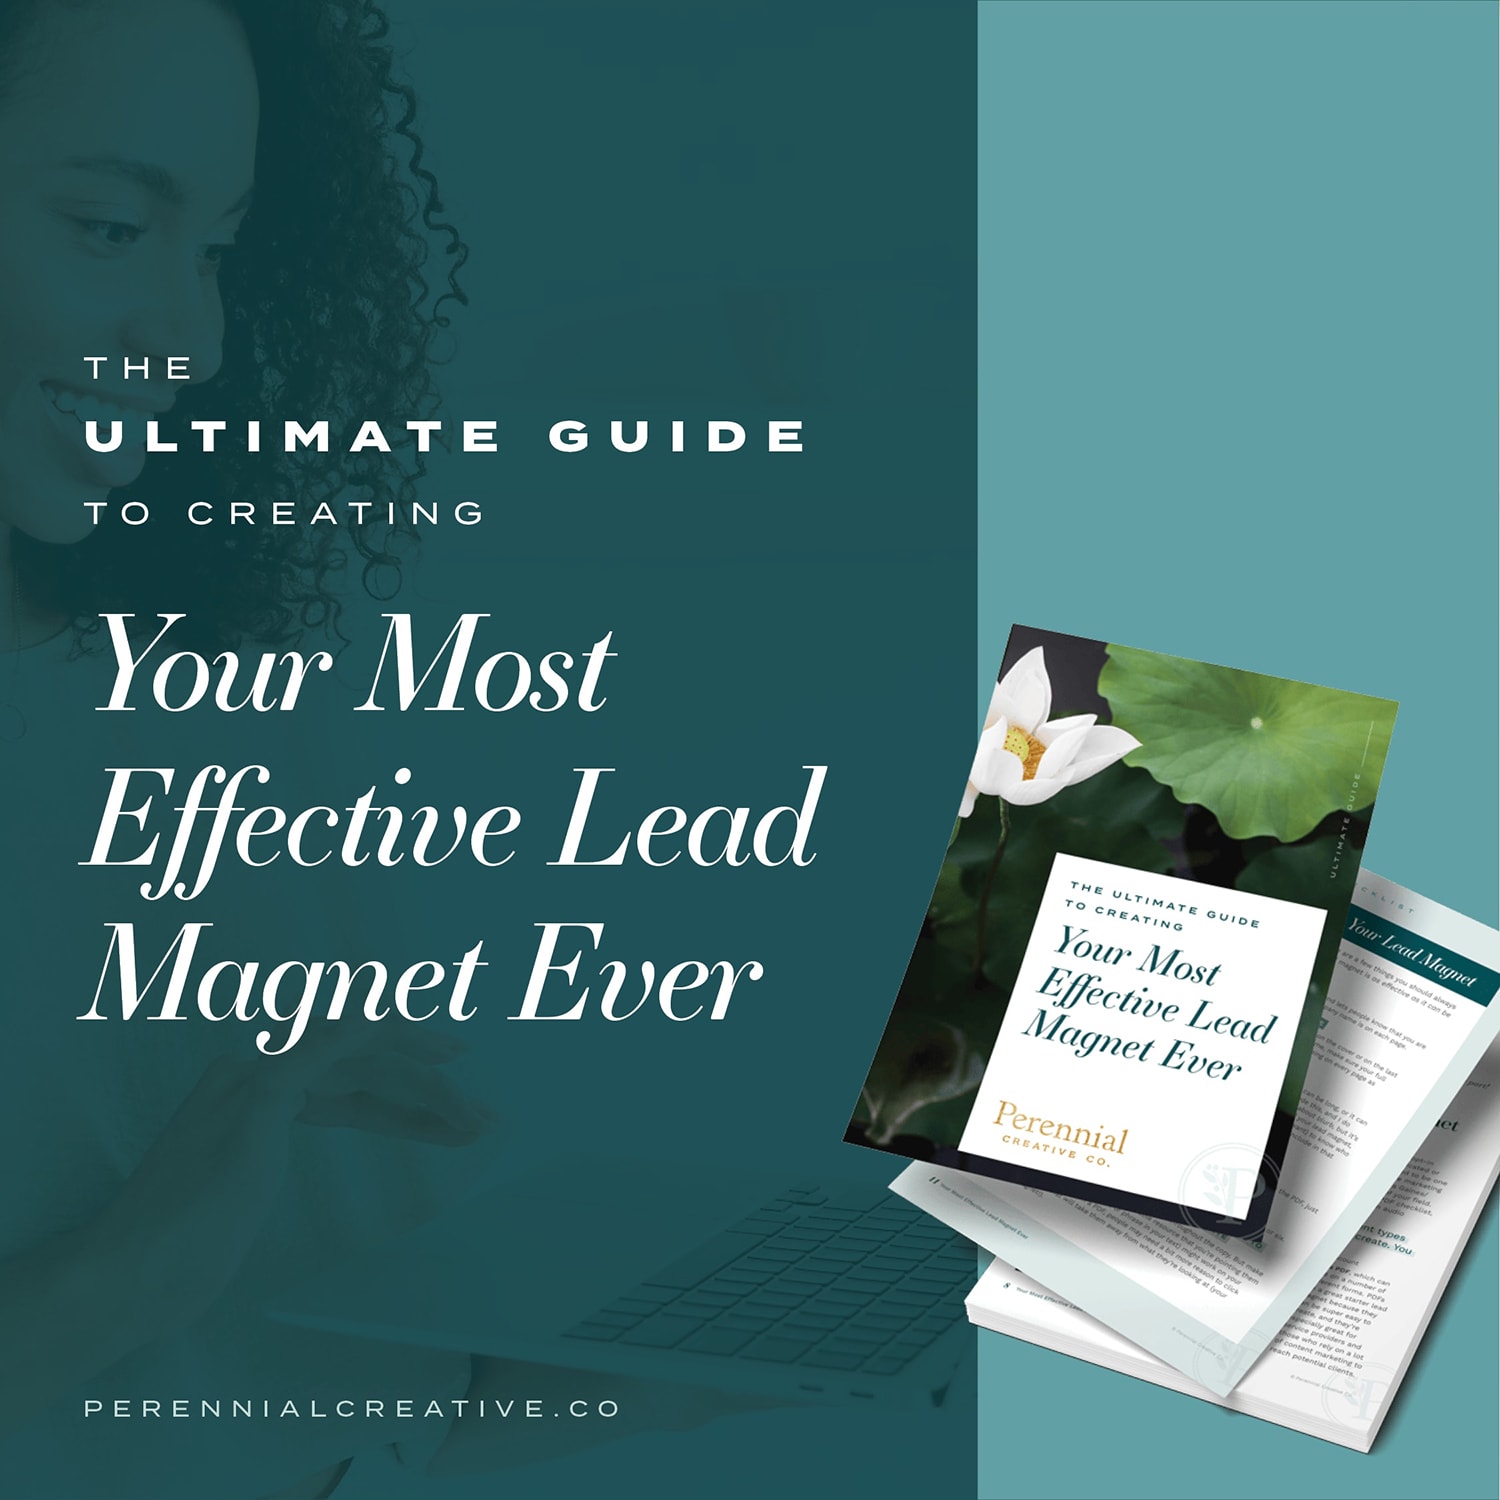 The Ultimate Guide to Creating Your Most Effective Lead Magnet Ever